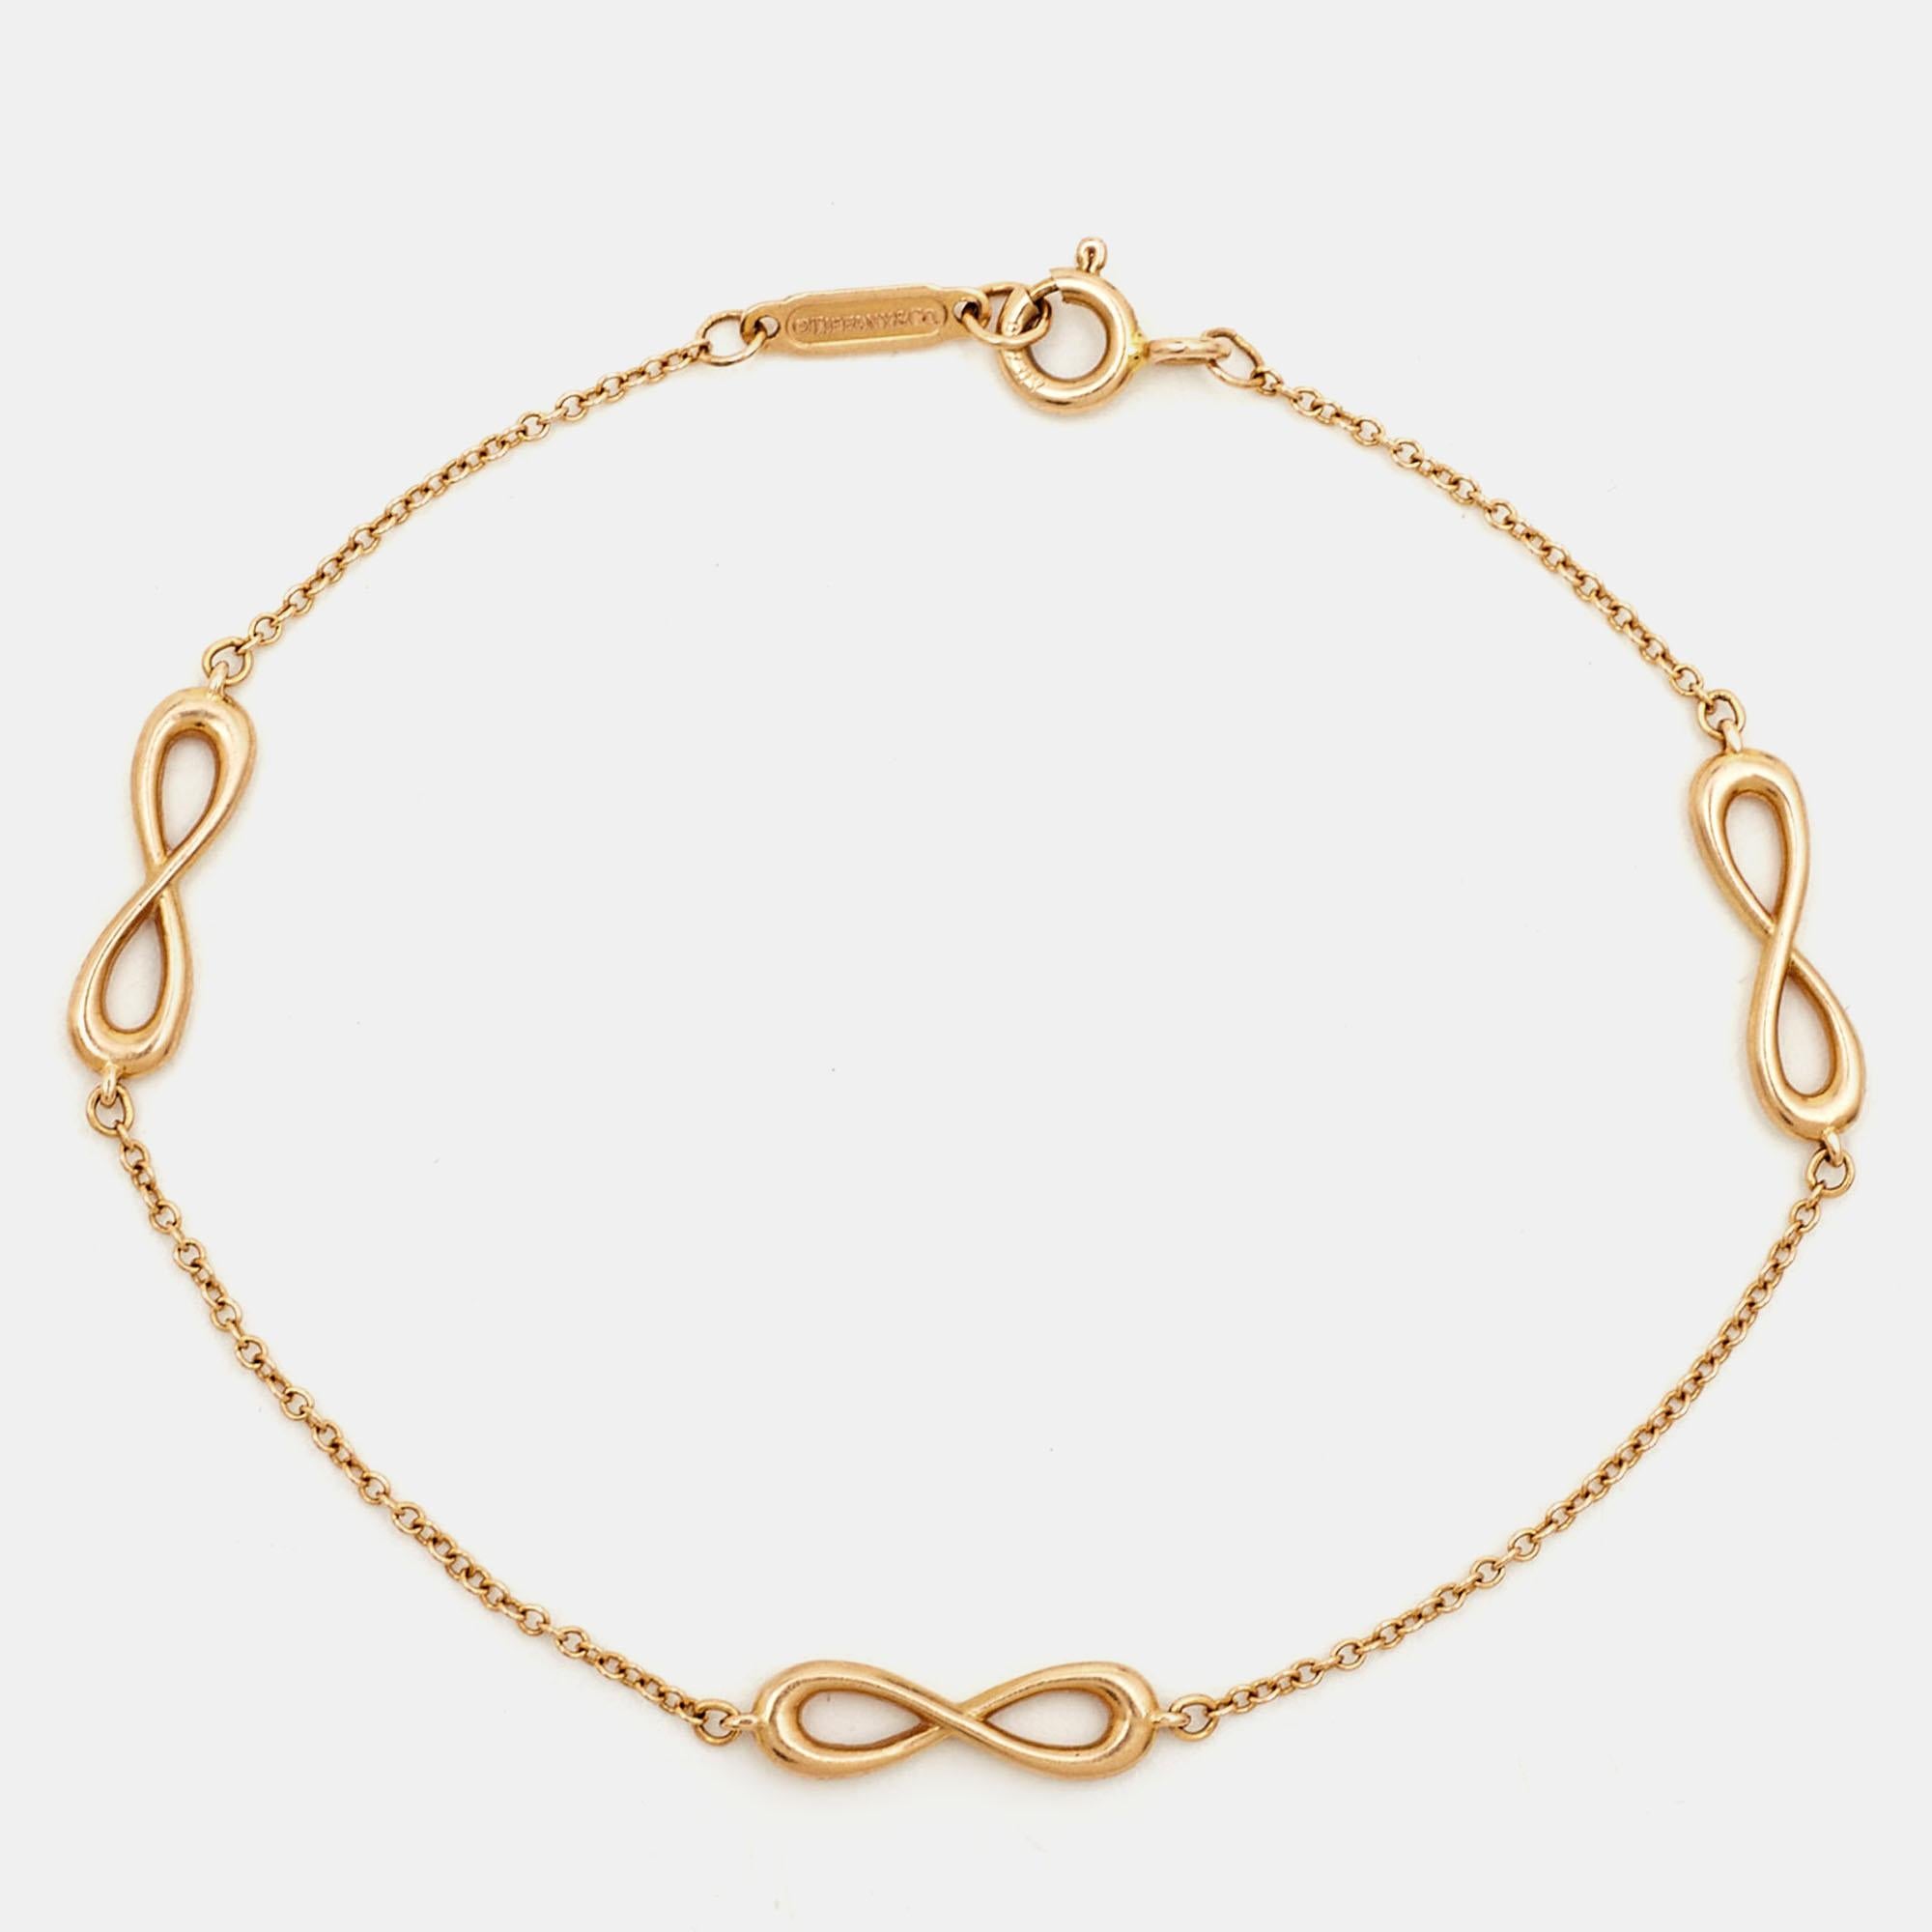 The choice of 18k rose gold coupled with heritage artisanship makes this Tiffany & Co. Infinity bracelet a creation worth cherishing. It sits gracefully on any wrist.

